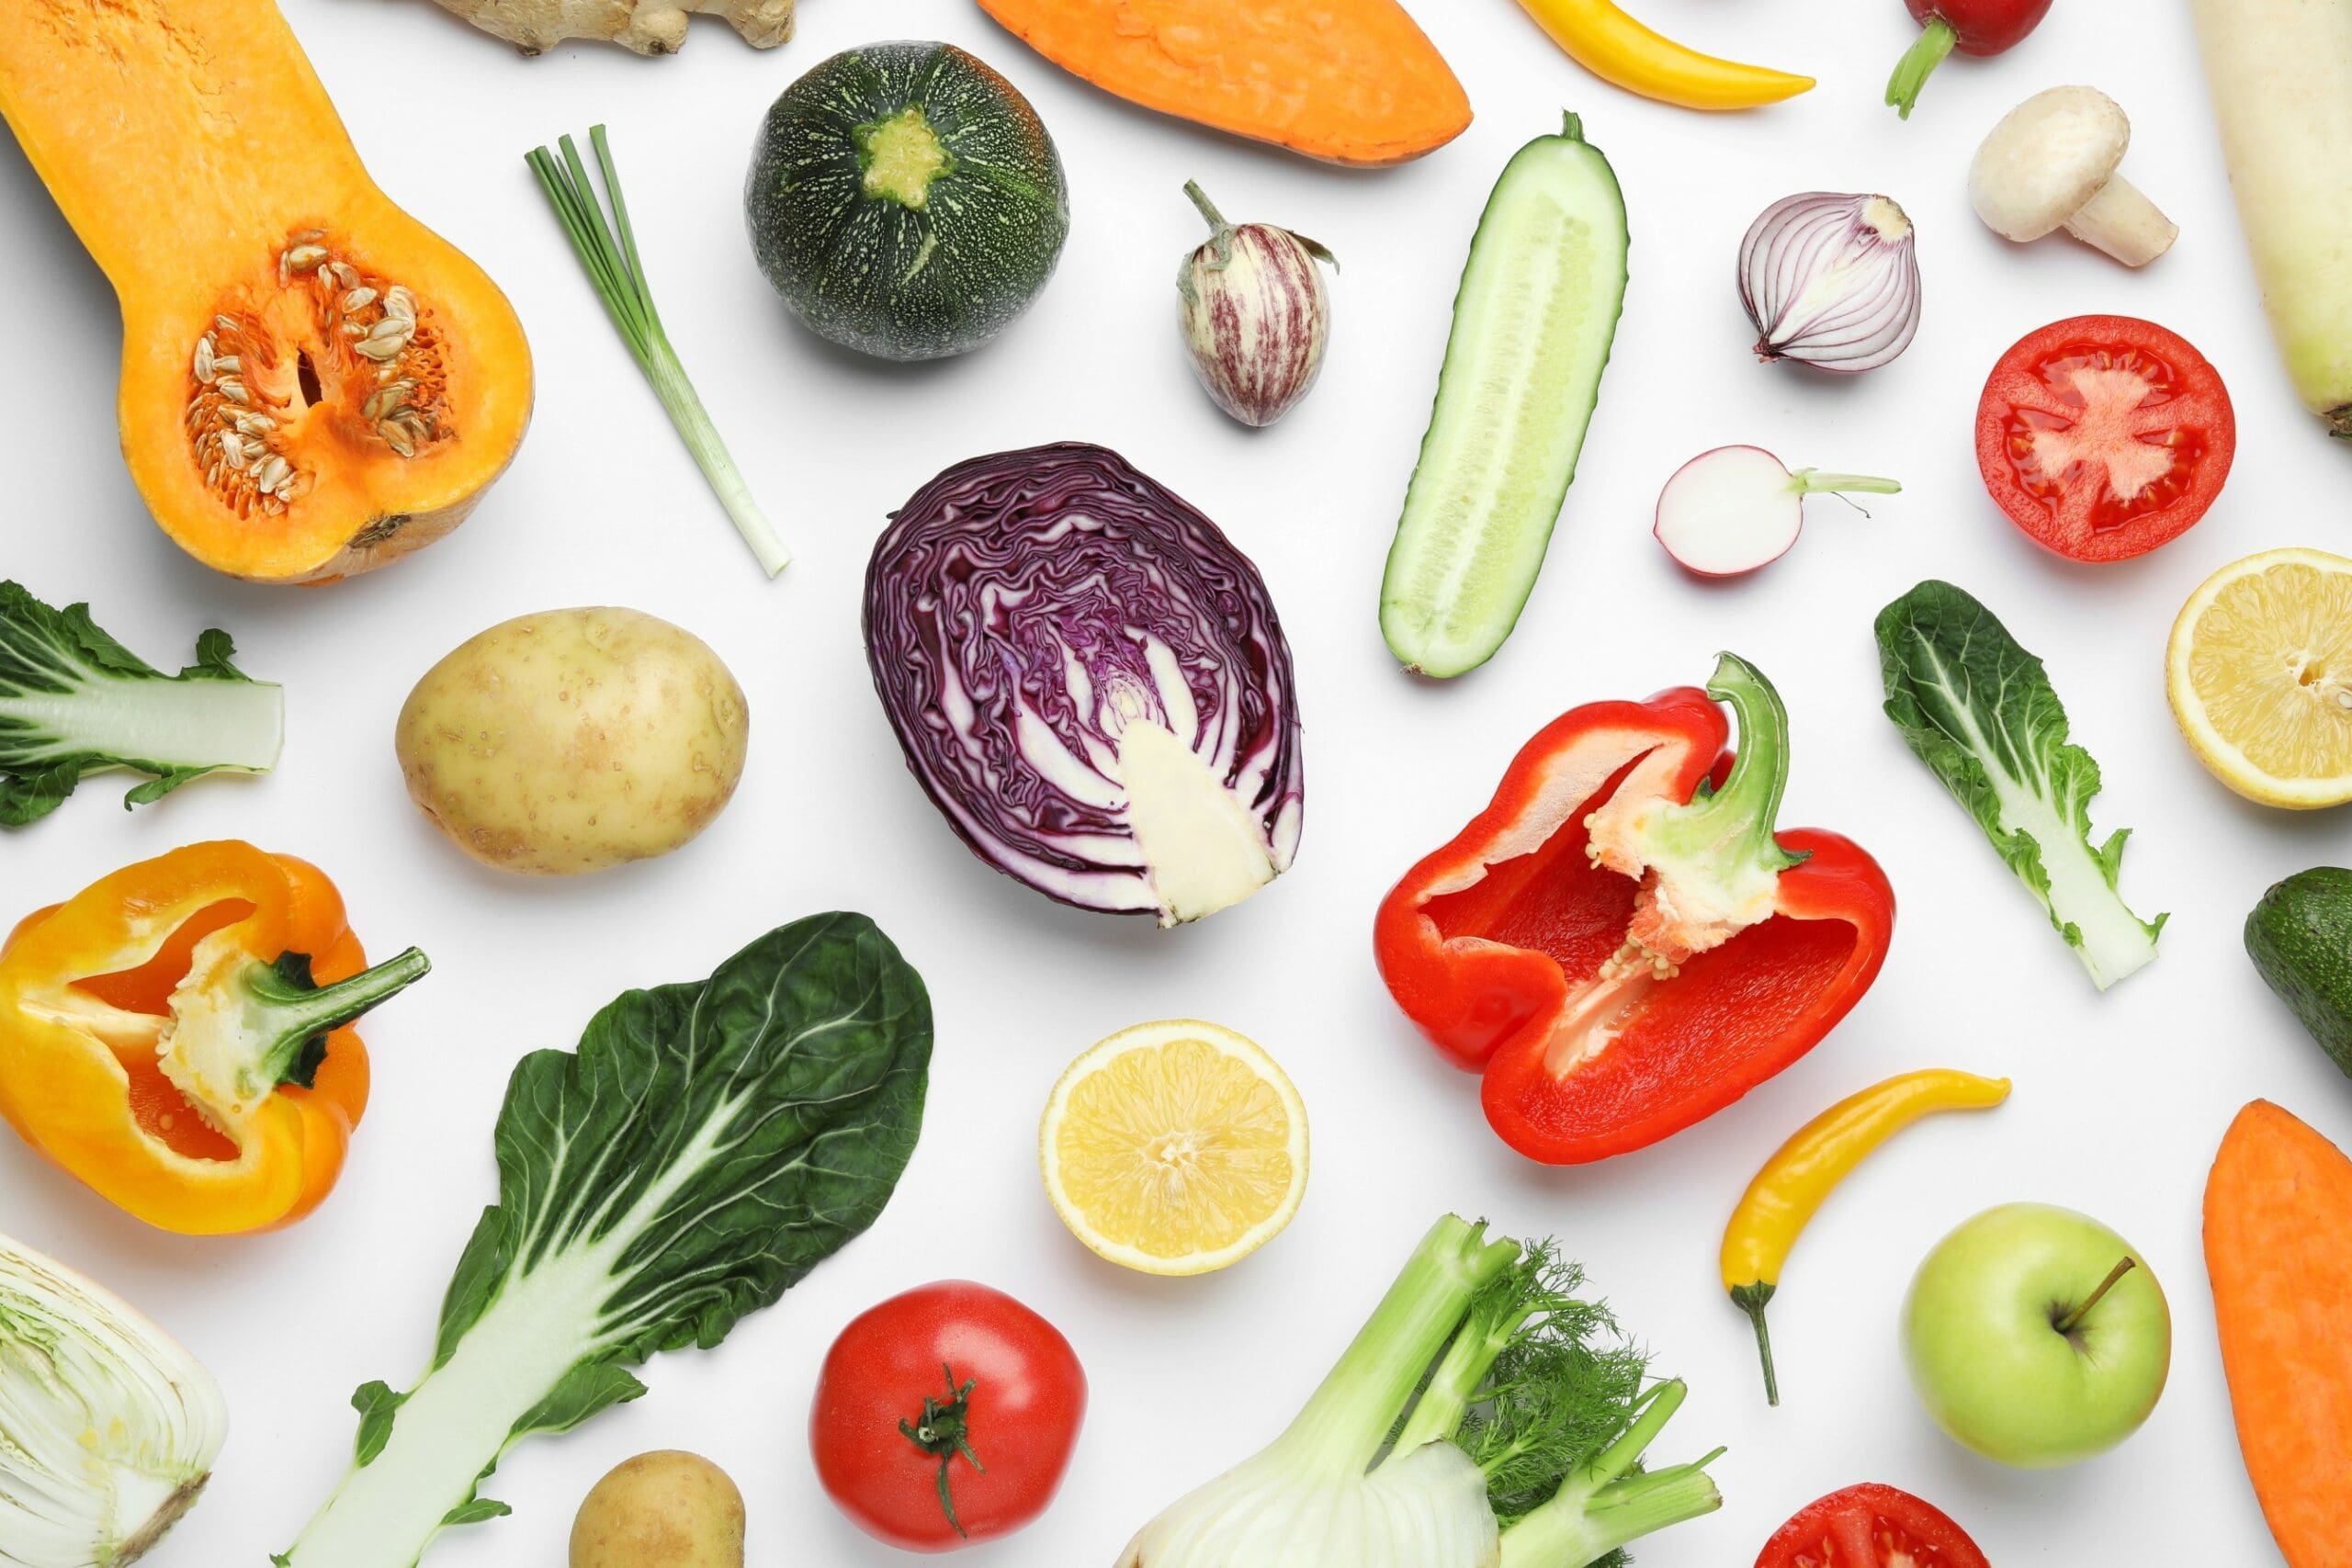 Do fruit and vegetables make you happy?